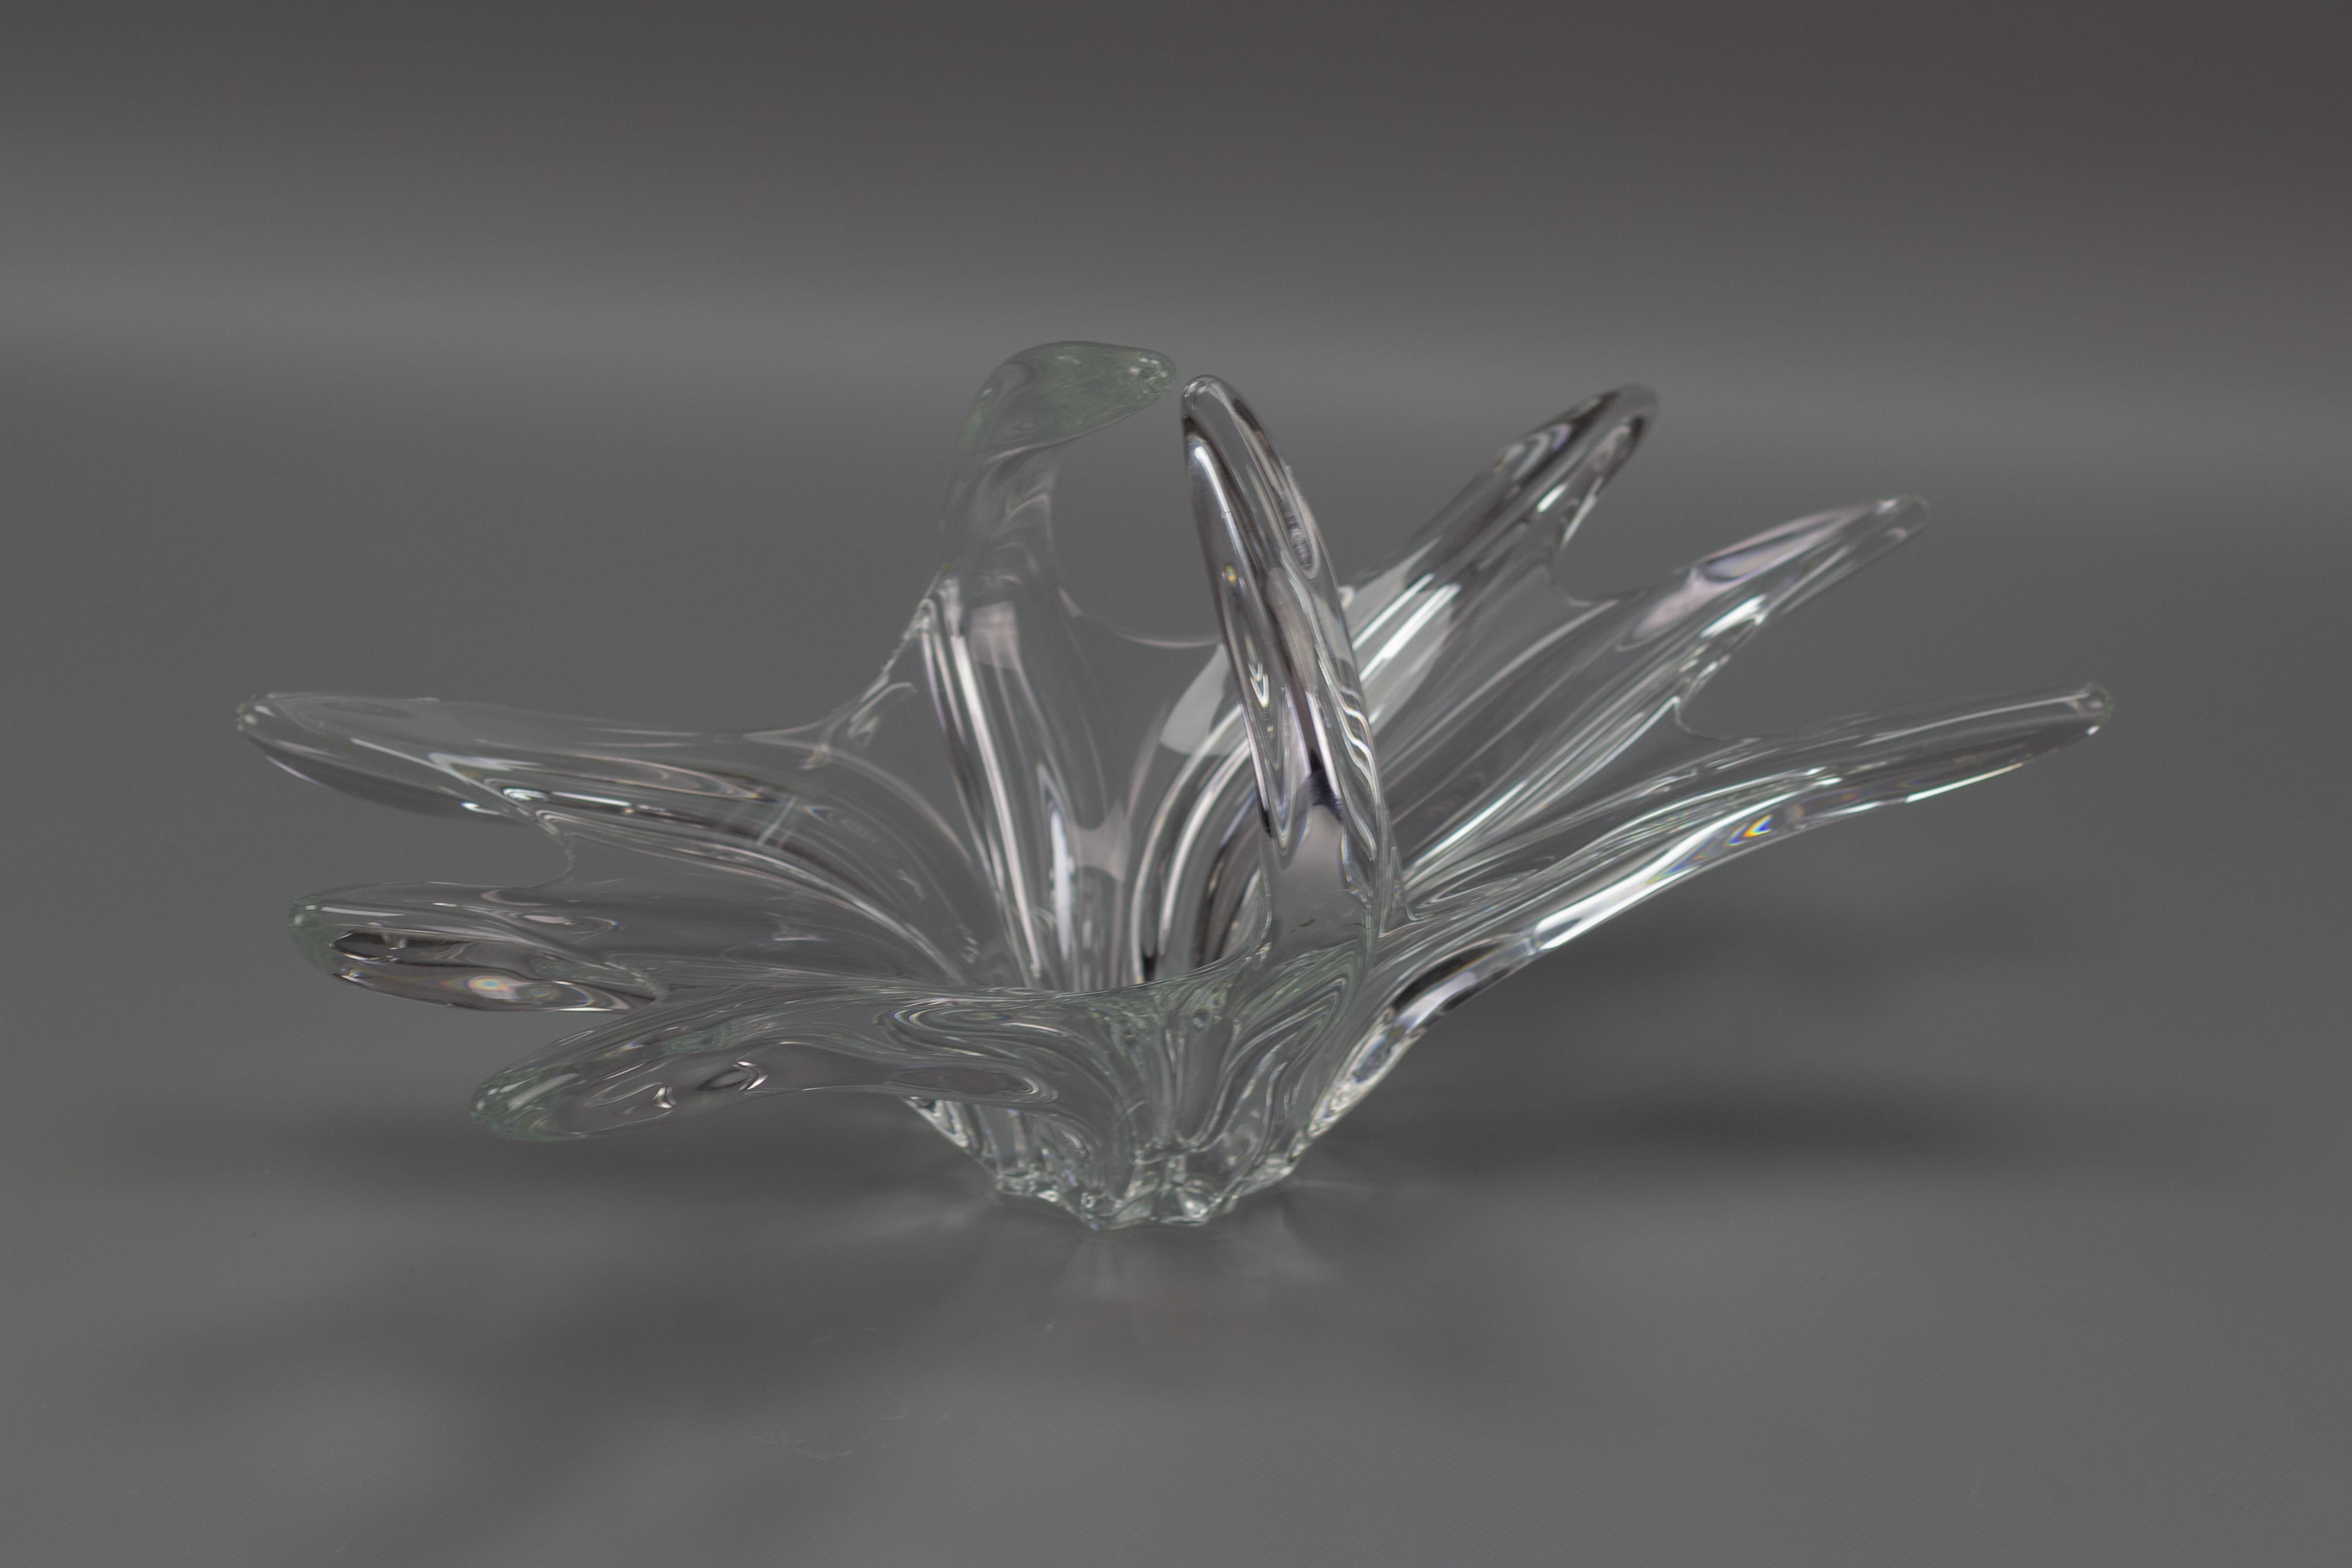 Adorable translucent hand-blown crystal glass fruit bowl or centerpiece by Art de Vannes France, 1960s. 
On the bottom marked with an etched factory mark Art Vannes France.
Dimensions: height: circa 22 cm / 8.66 in; width: circa 19 cm / 7.48 in;